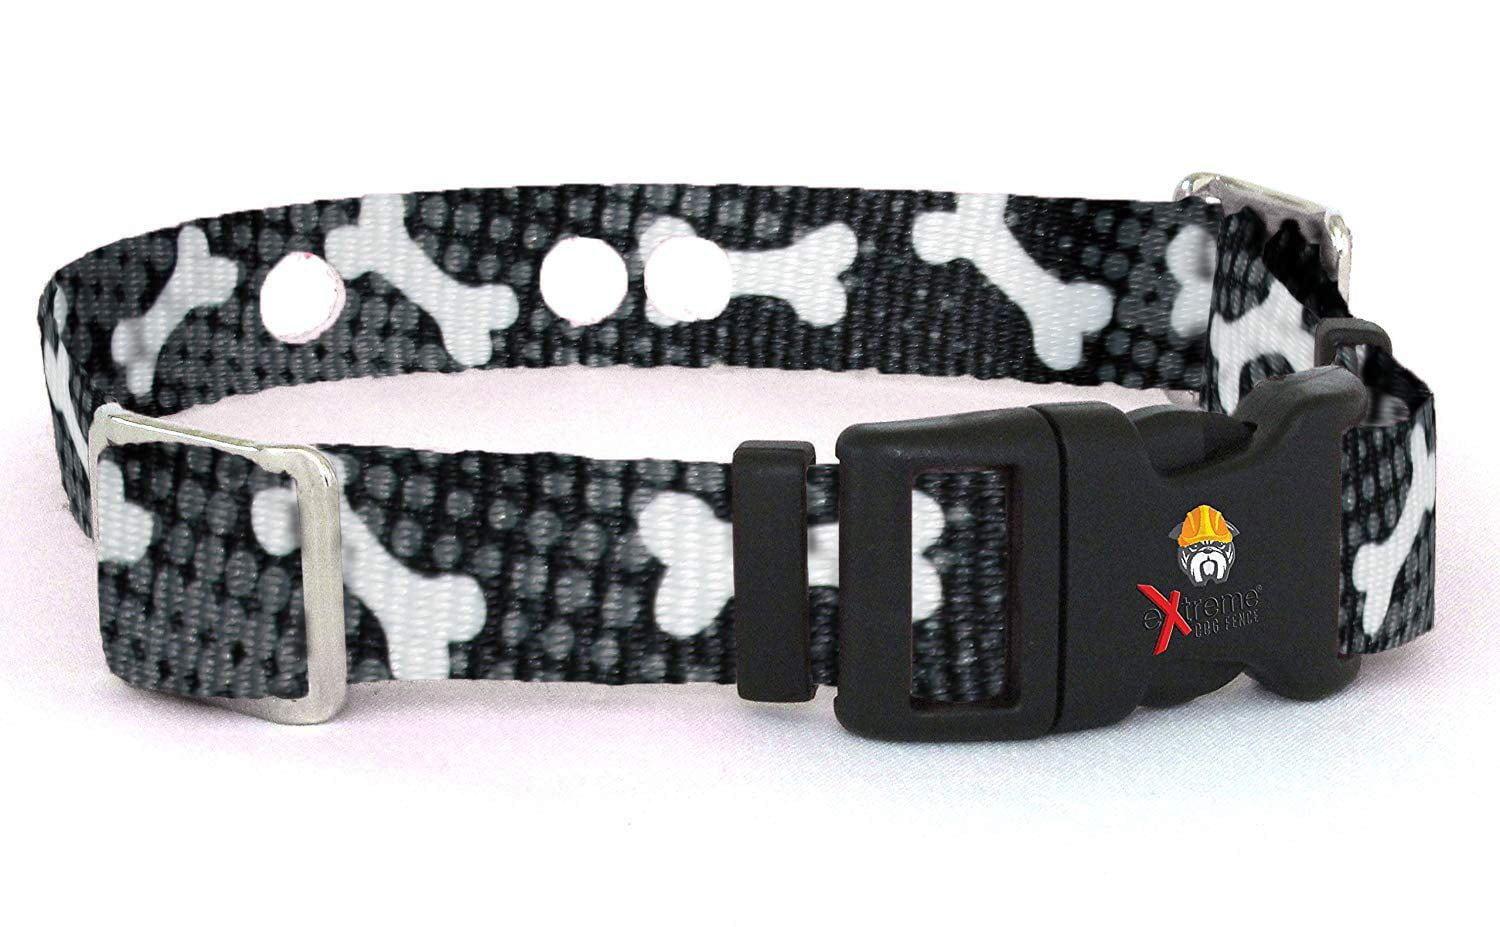 Universal replacement collar strap for bark or electric dog fence collar 